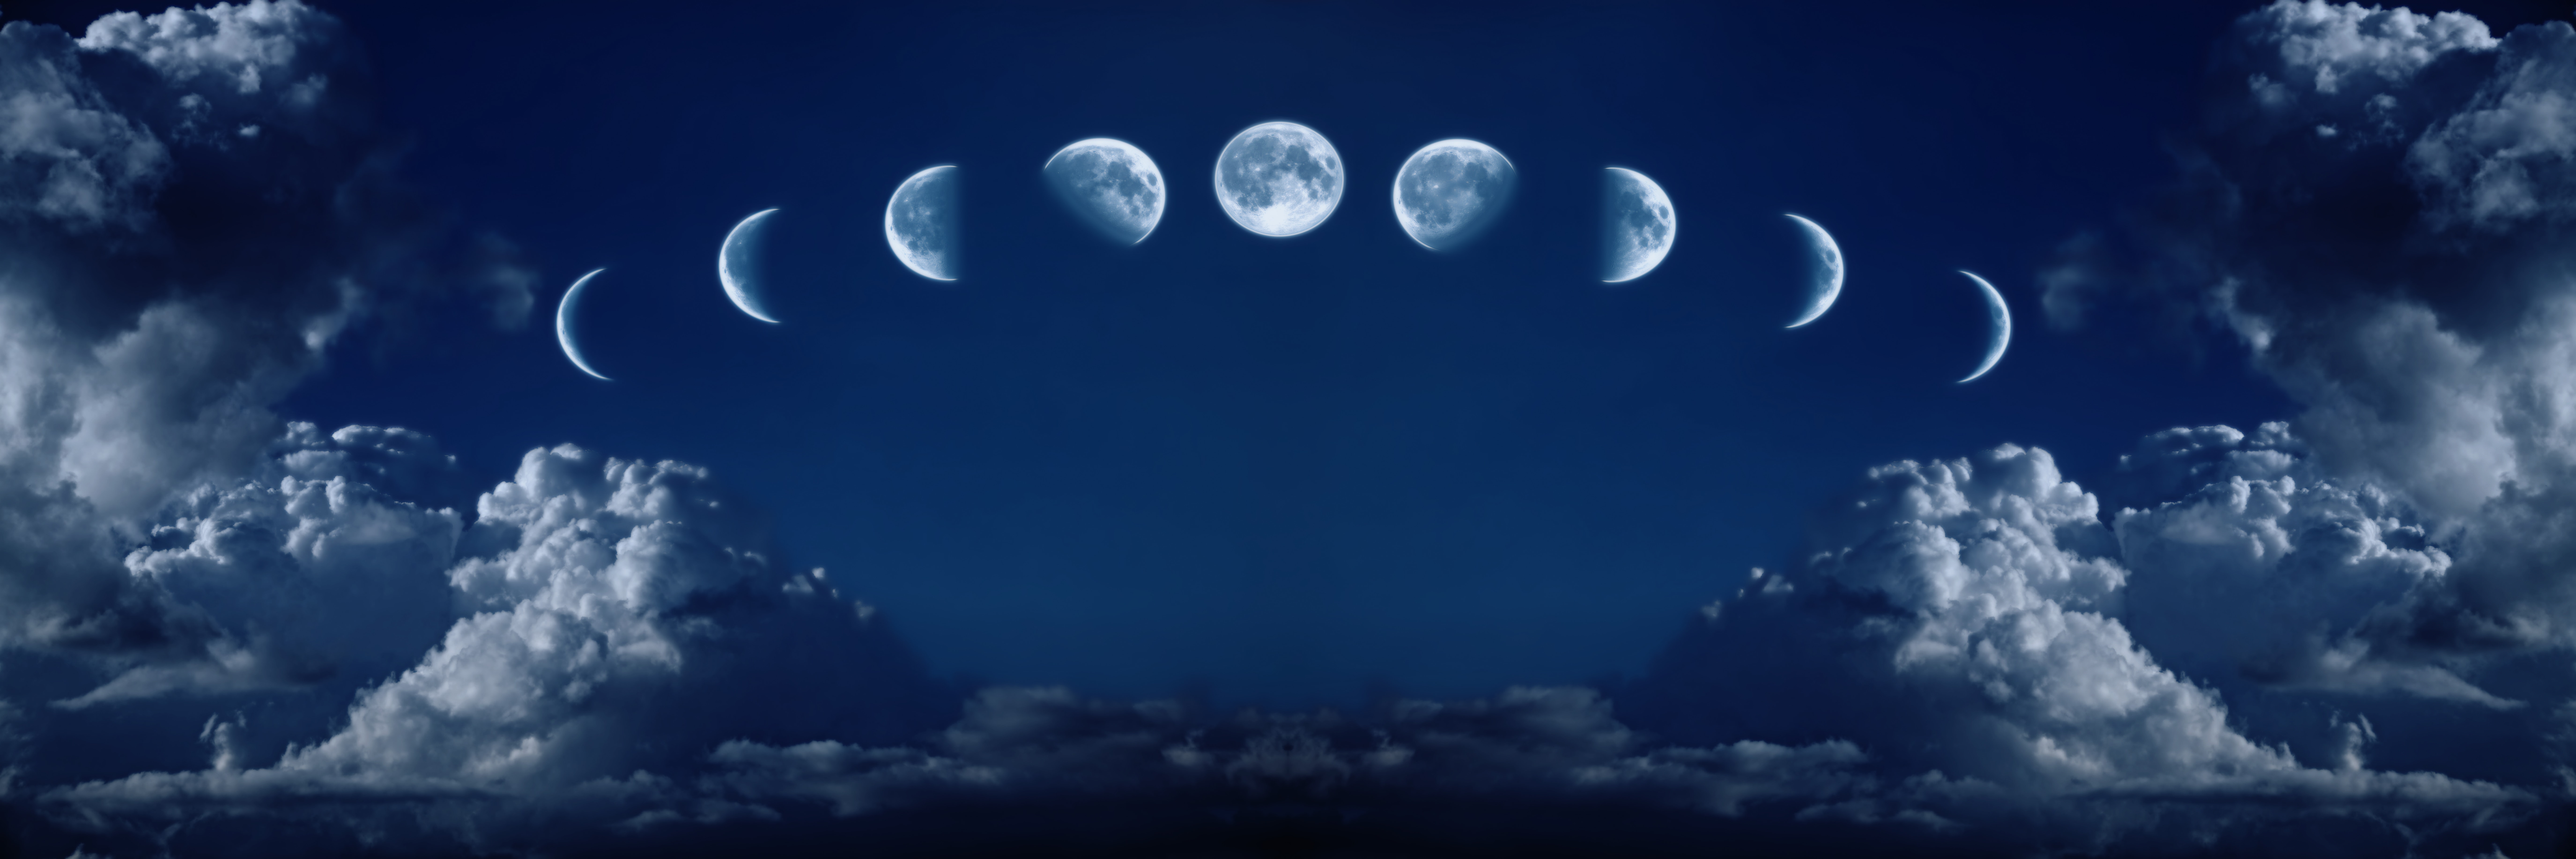 Nine phases of the moon